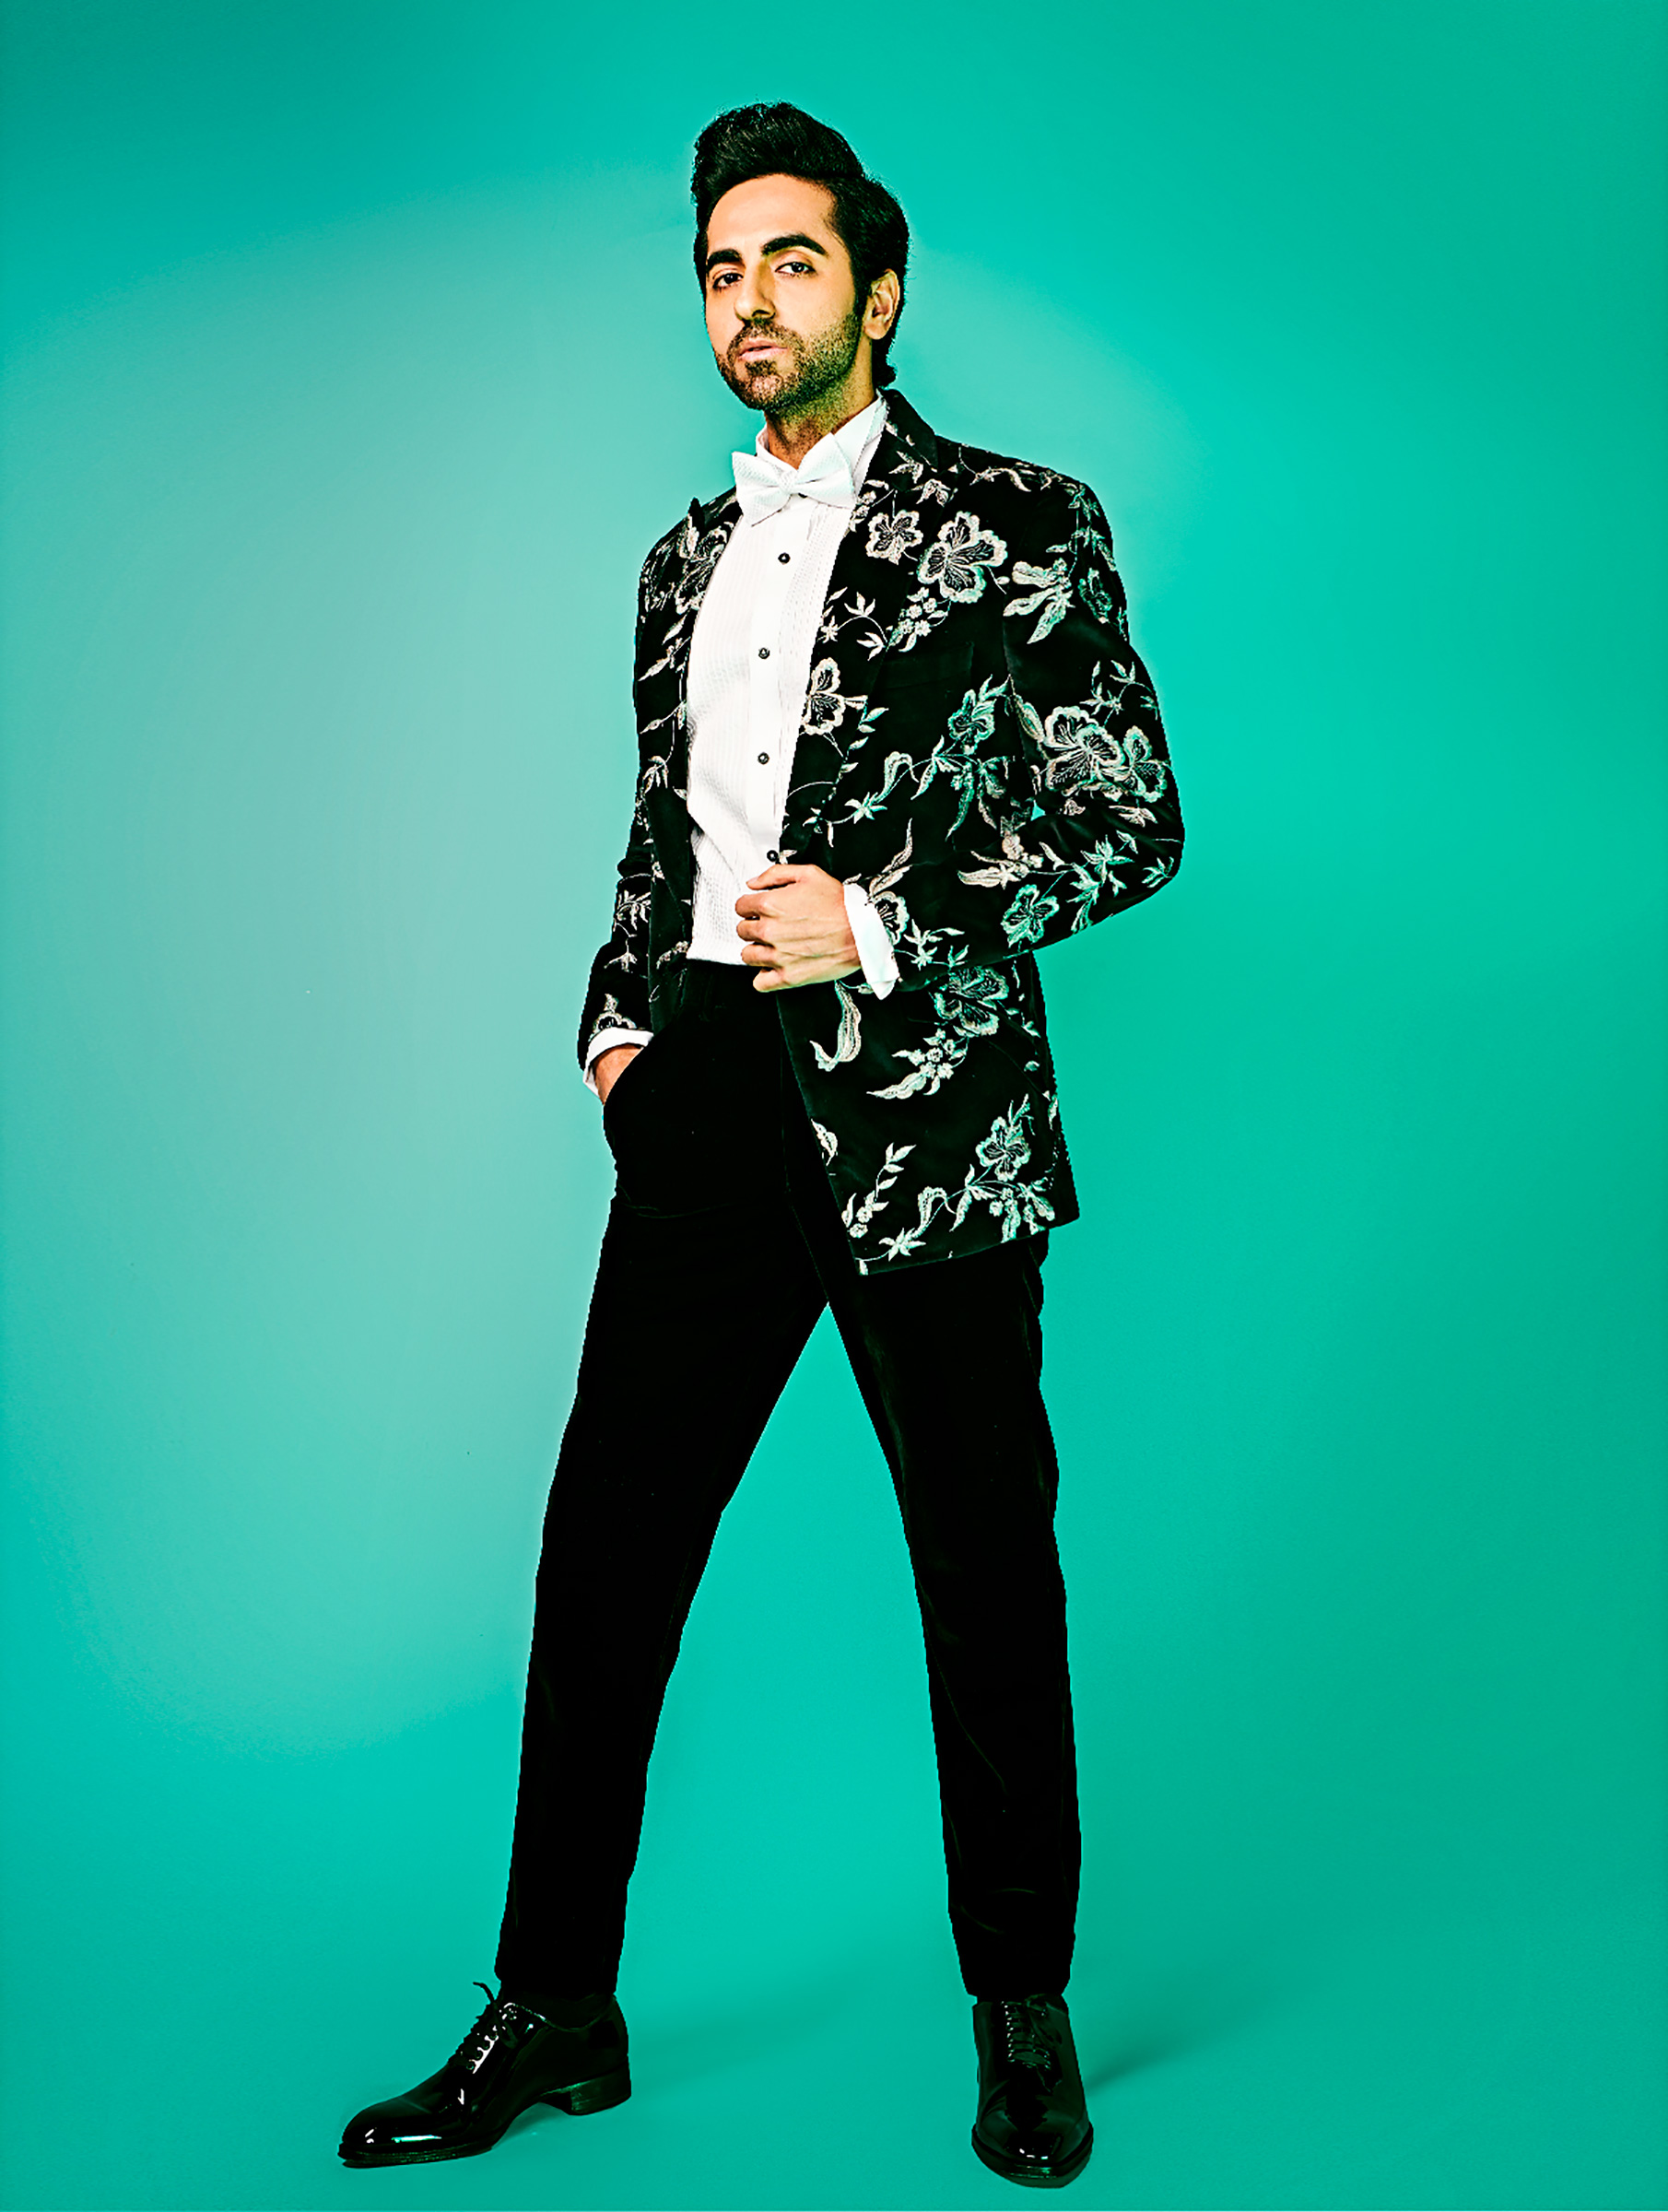 ayushmann khurrana is on the 2020 time 100 list | time